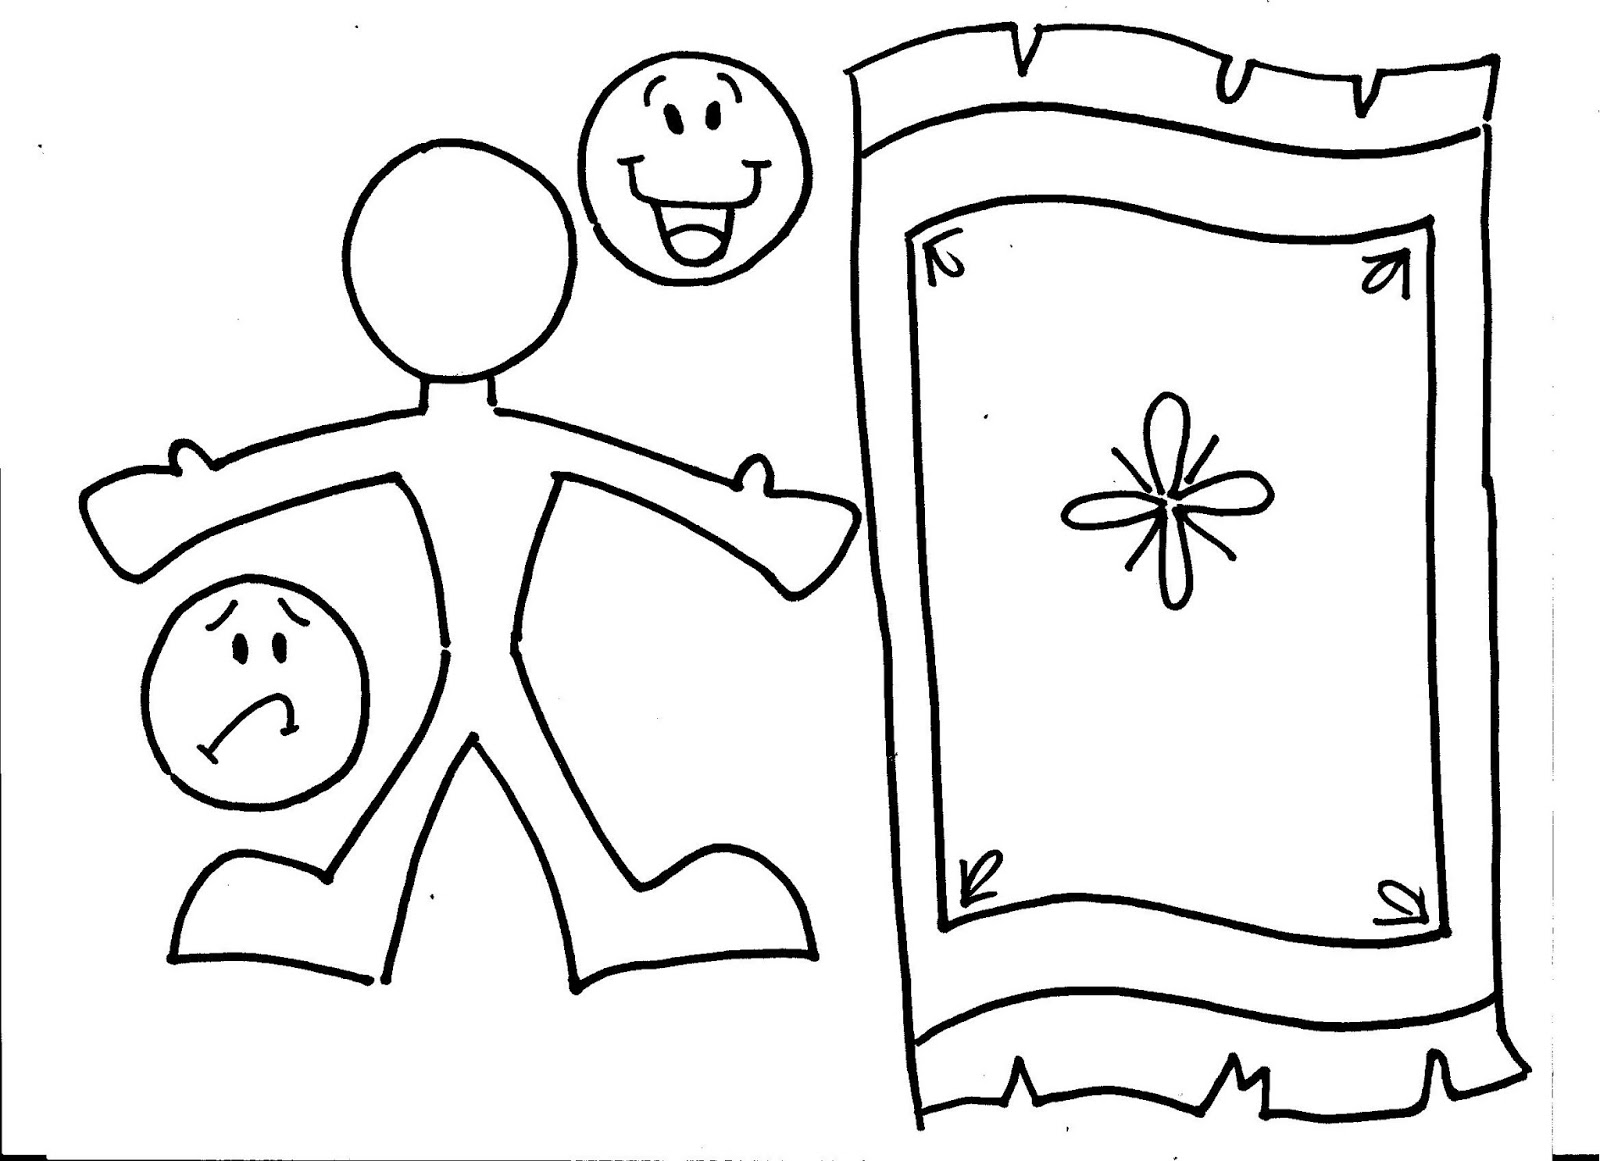 Paralyzed Man Coloring Page Coloring Pages